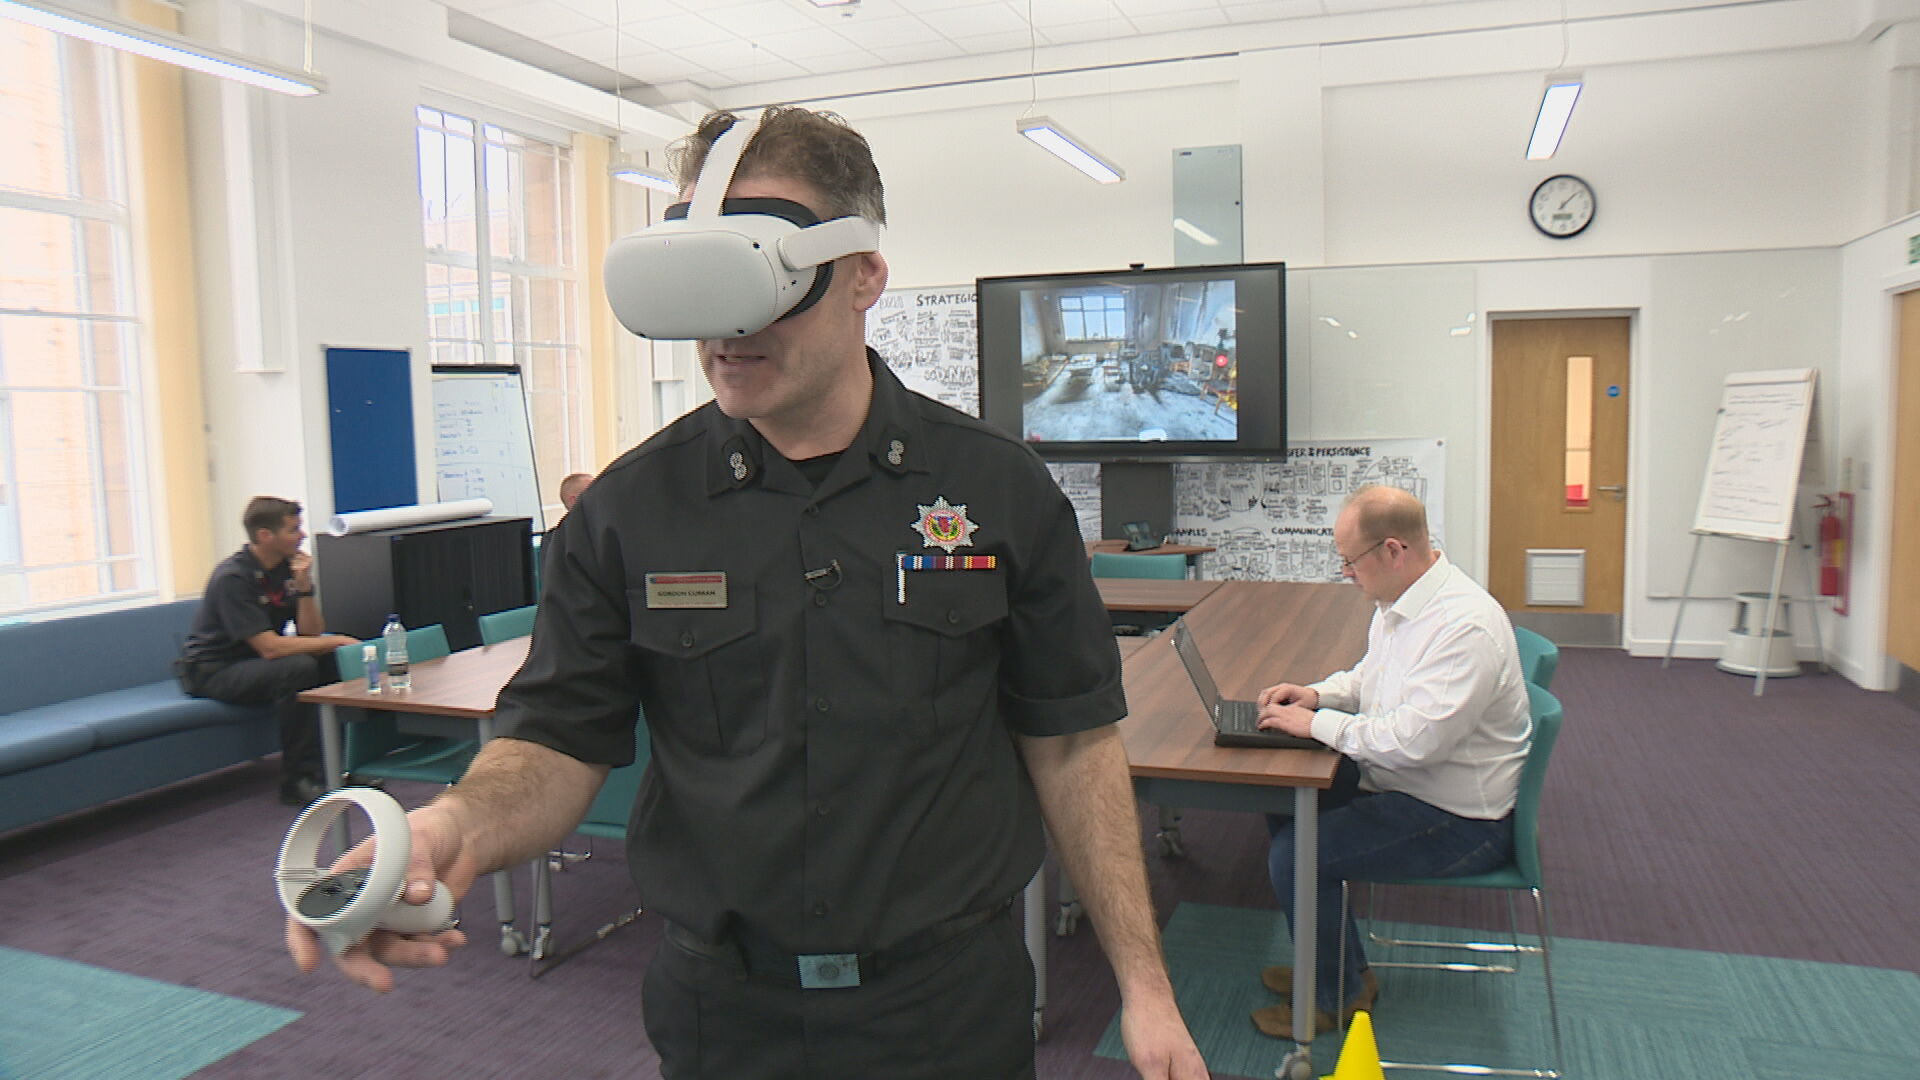 Virtual reality training has been introduced for fire investigators